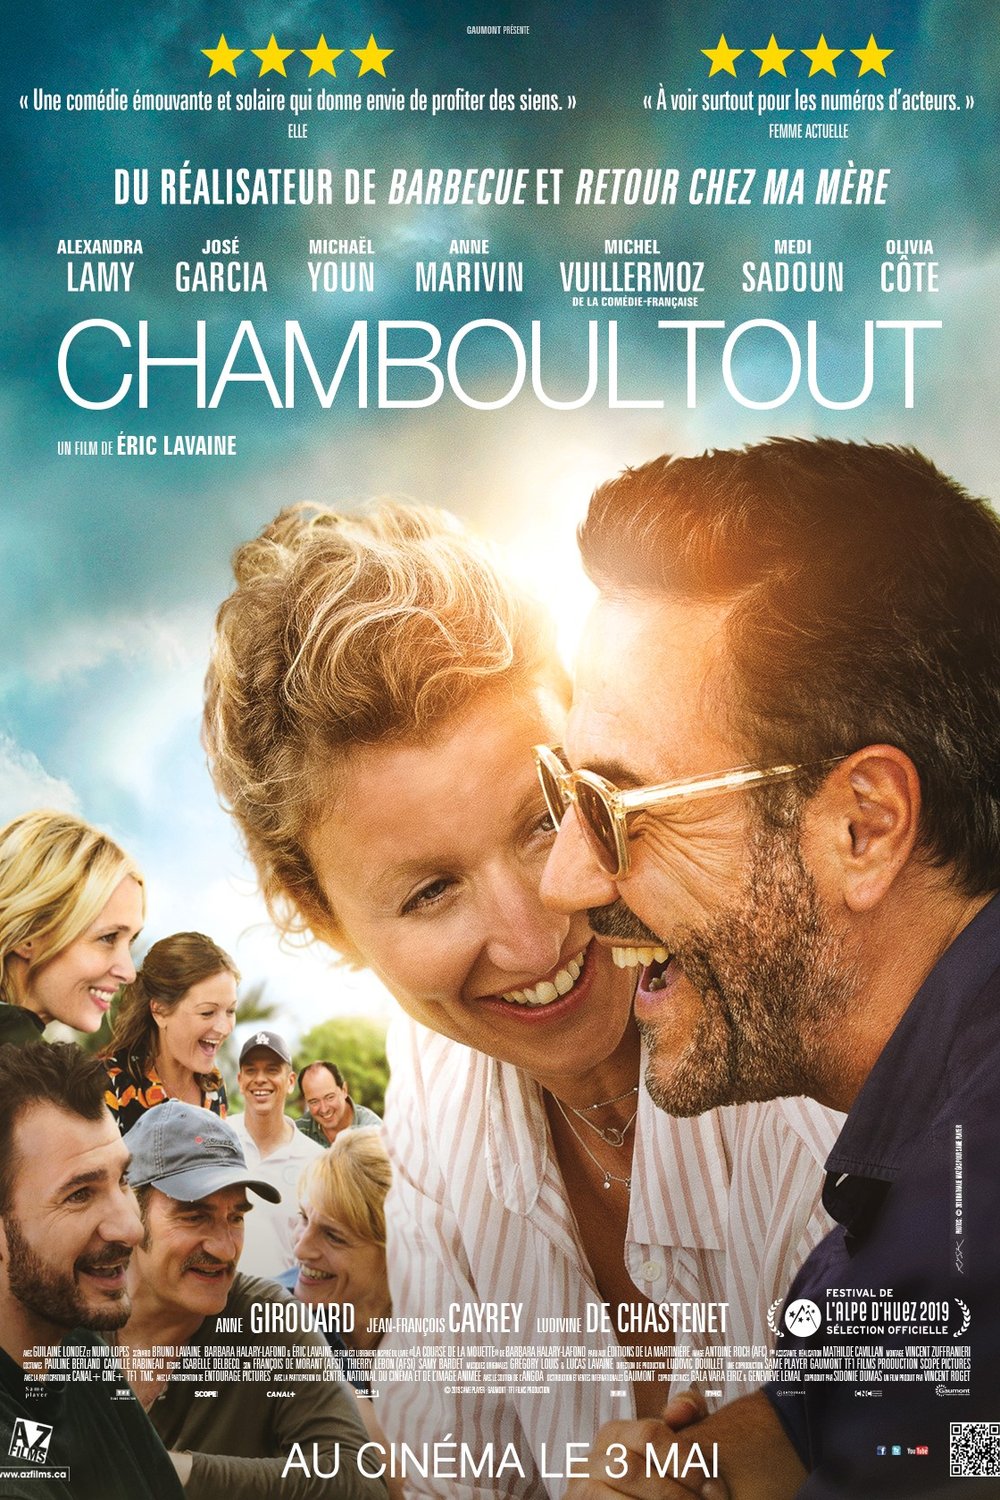 Poster of the movie Chamboultout